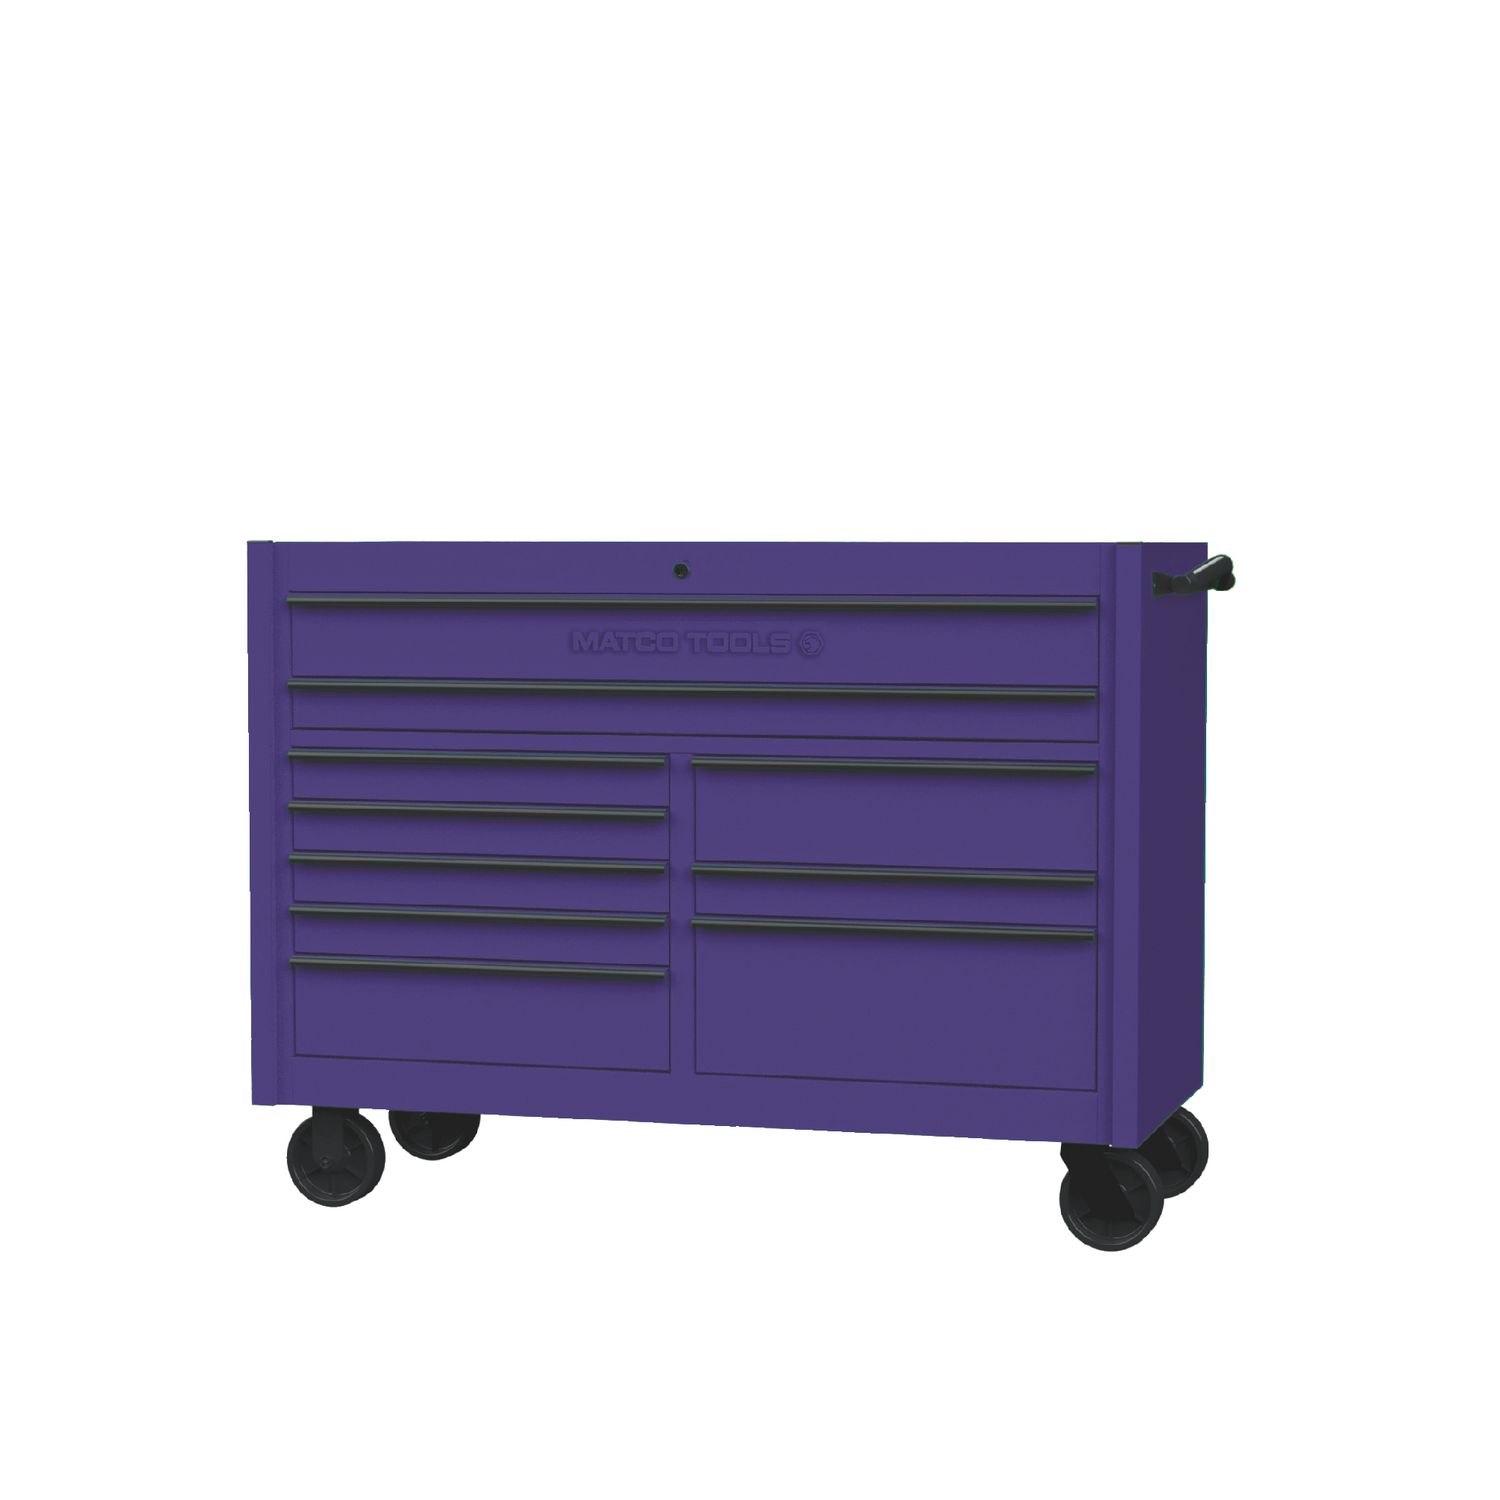 4225RX DOUBLE BAY 25 TOOLBOX ELECTRIC PURPLE WITH BLACK TRIM